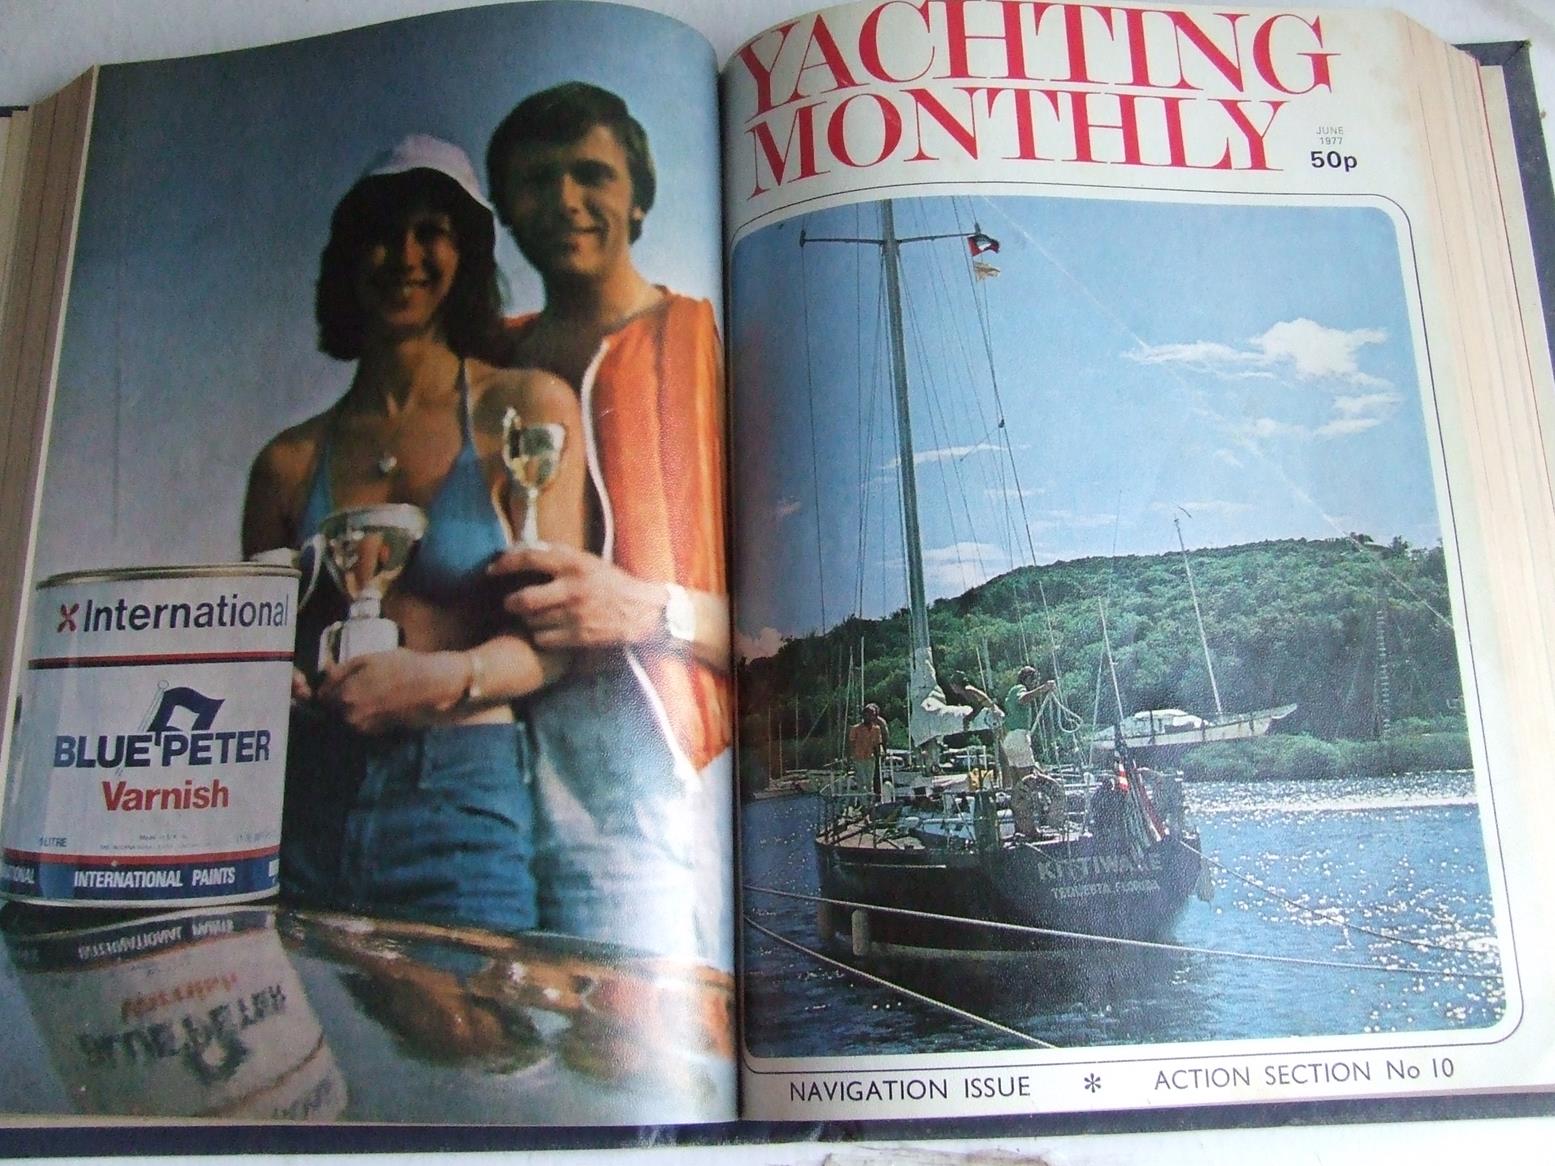 Yachting Monthly volume 137, January - December 1977